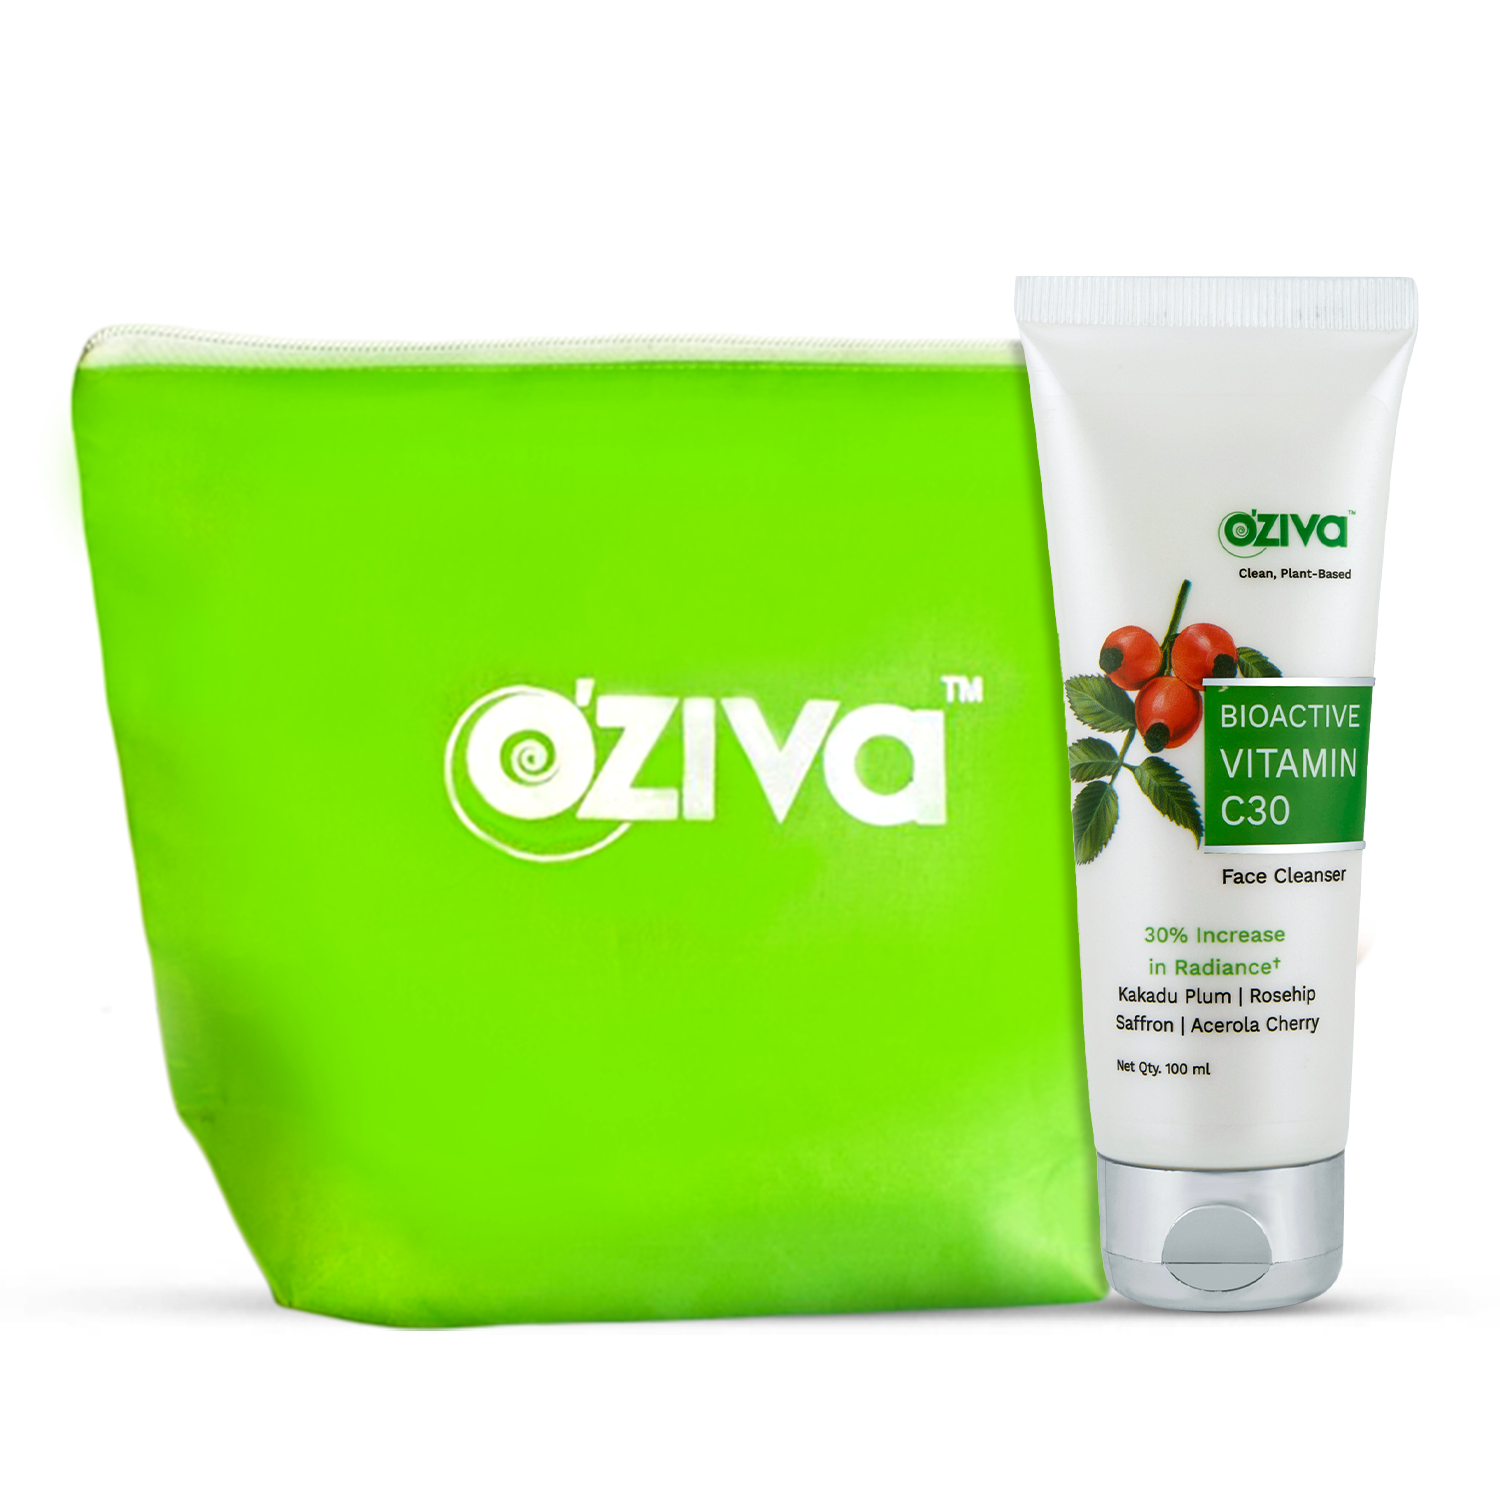 Glow on-the-go Duo | Oziva Bioactive Vitamin C30 Face Cleanser + Glambag